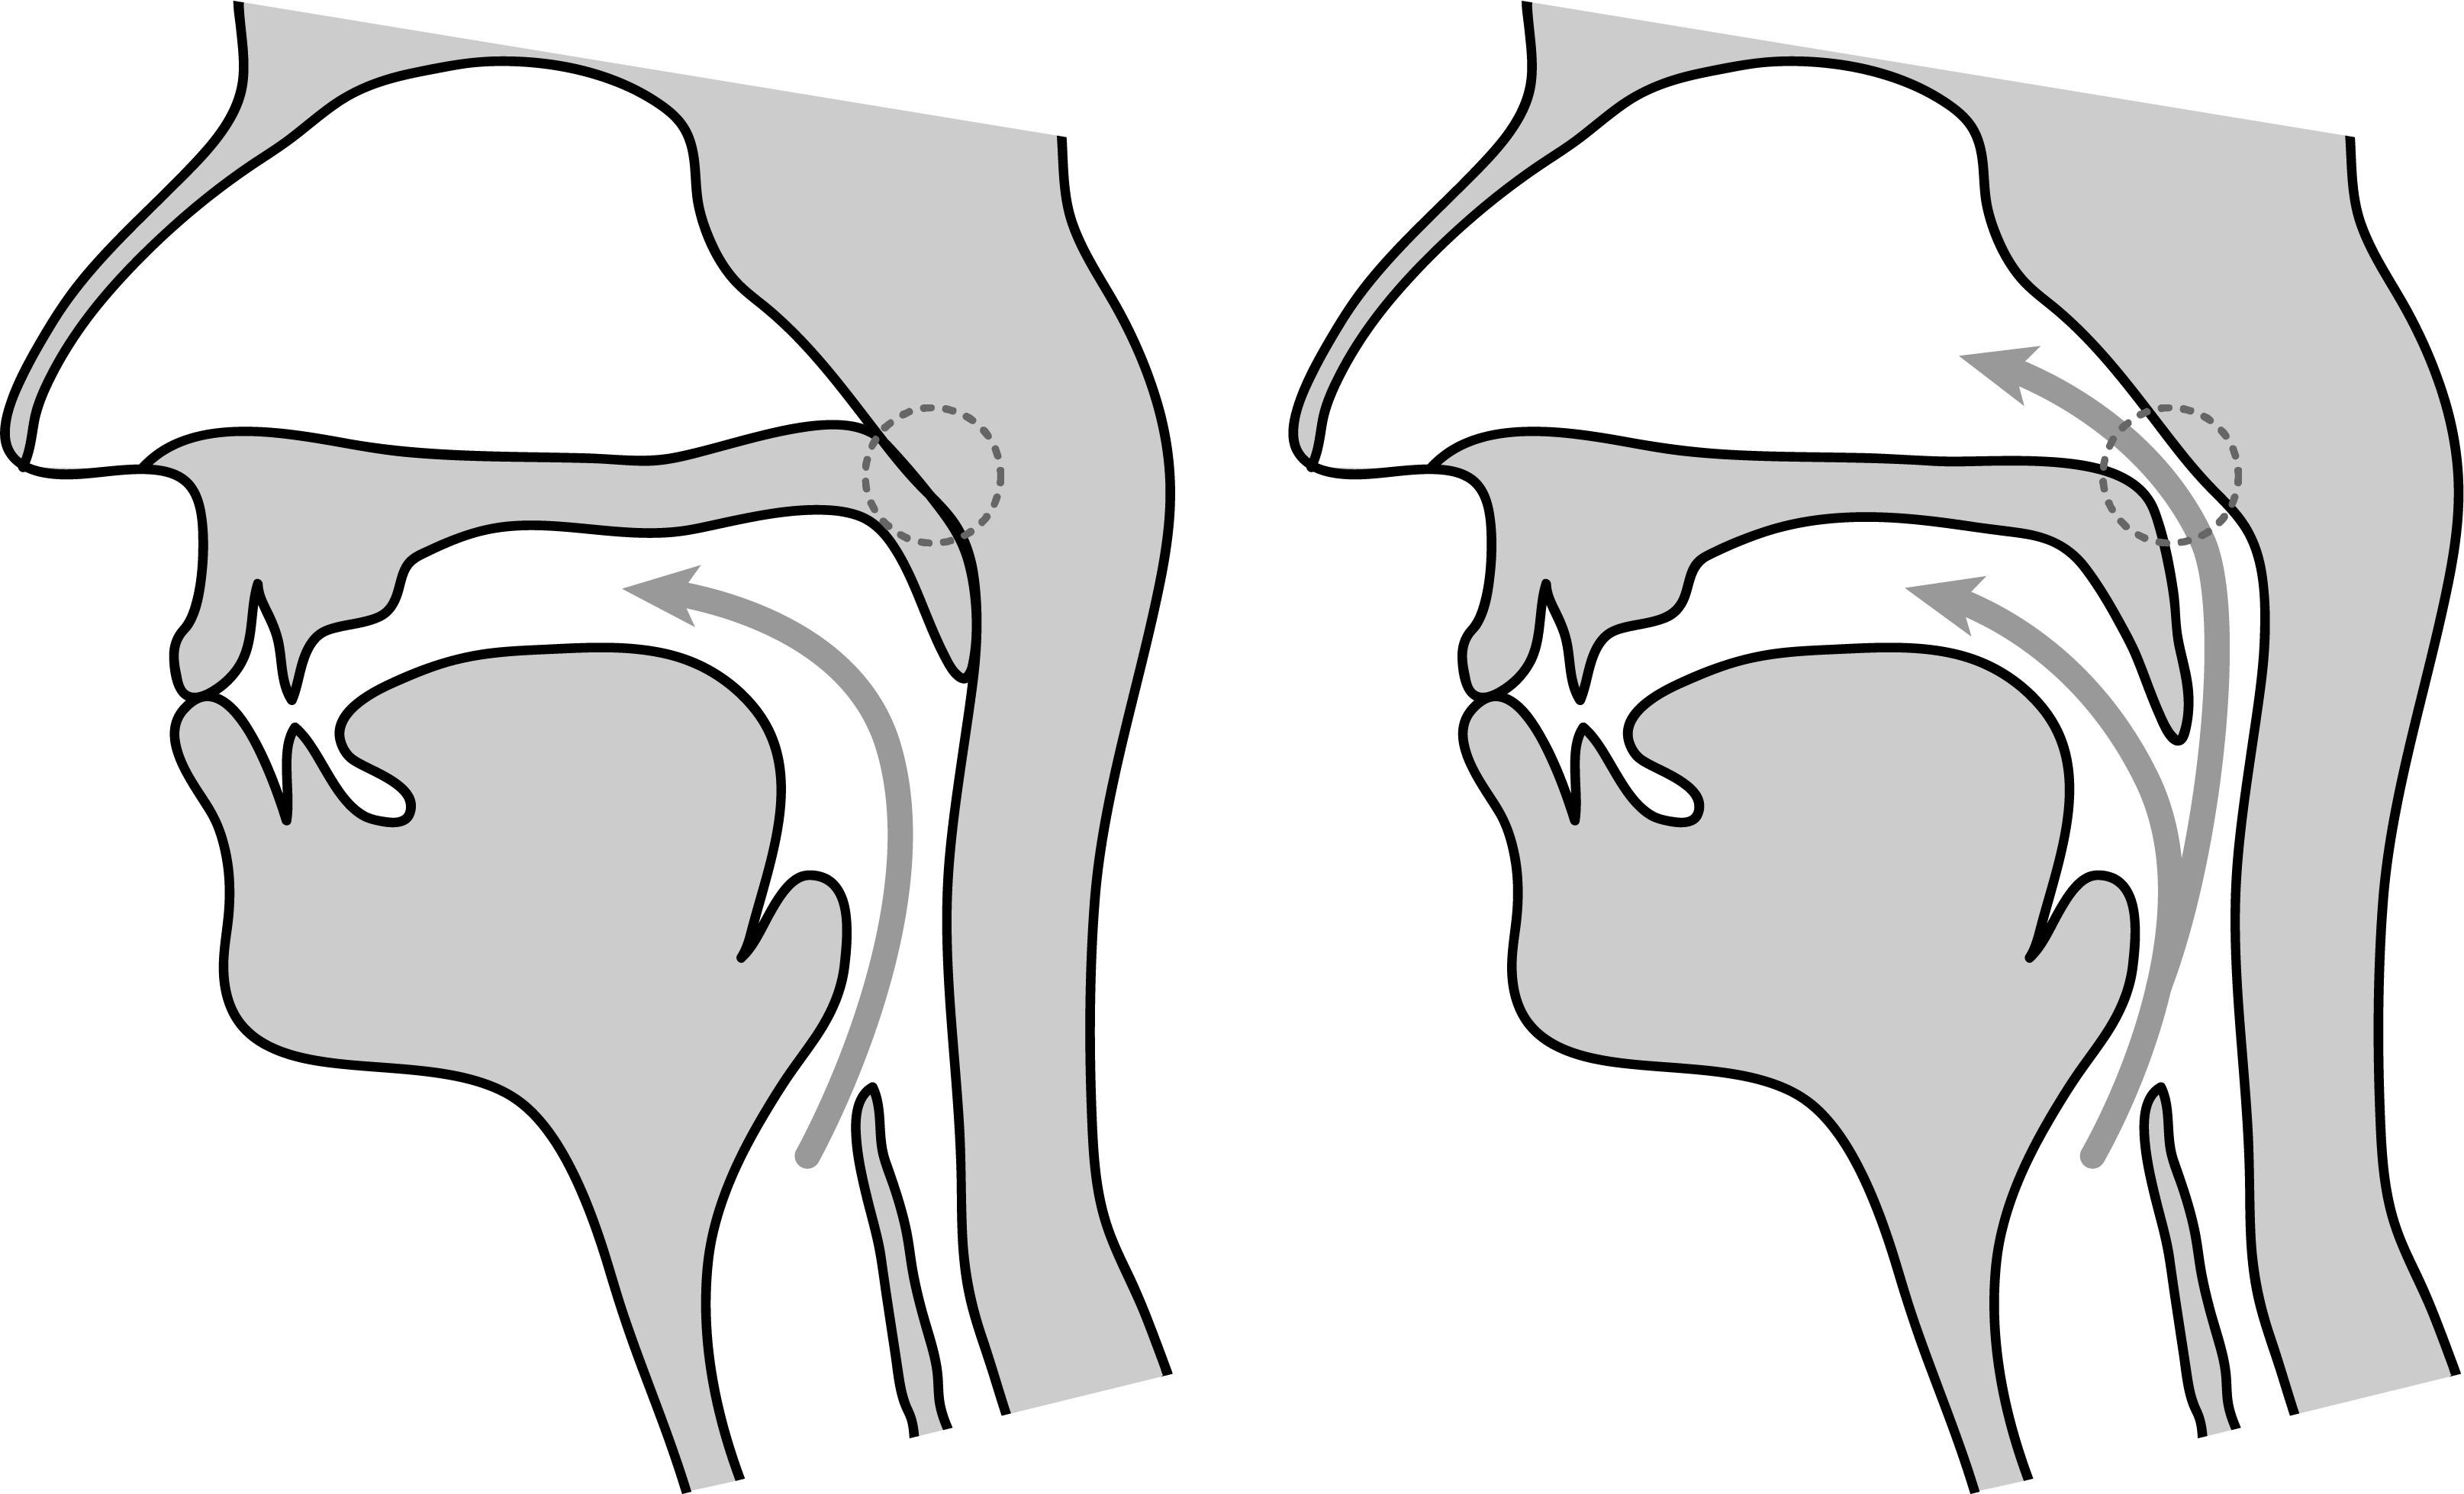 Midsagittal diagrams of oral and nasal stops, showing the velum raised and retracted for the oral stop on the left and the velum lowered and fronted for the nasal stop on the right.